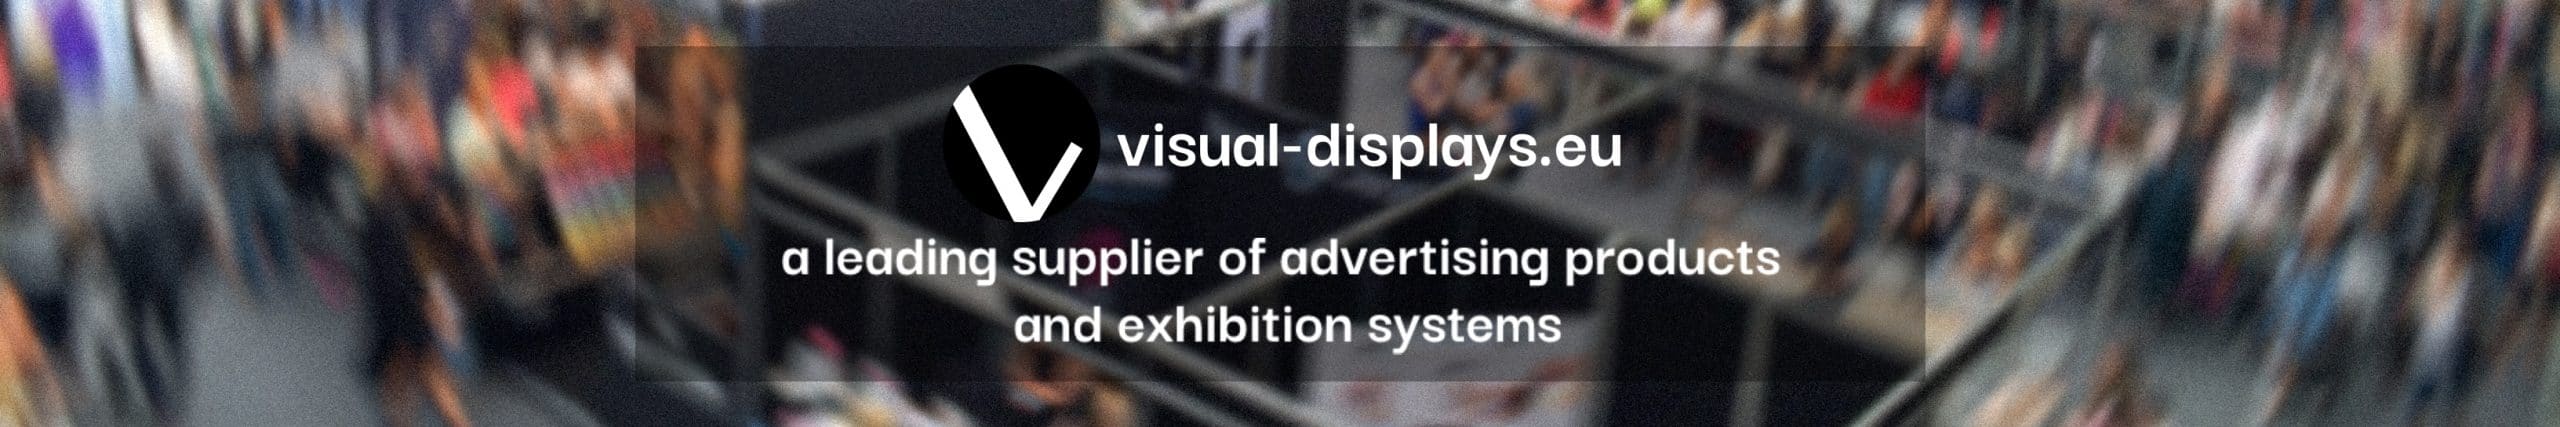 visual-displays.eu supplier of the advertising products and exhibition systems